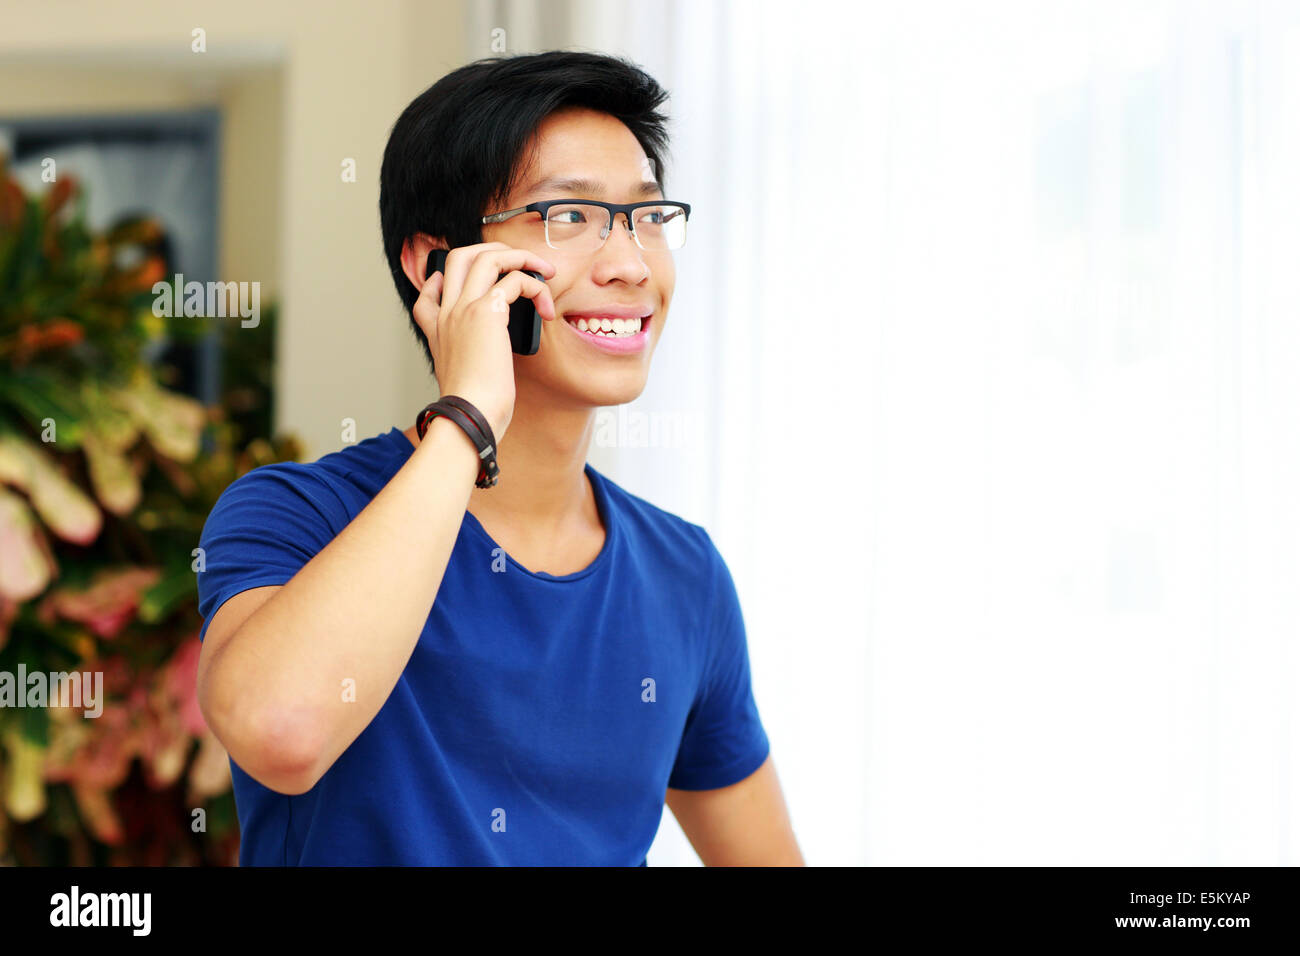 Smiling Asian man talking on the phone at home Banque D'Images